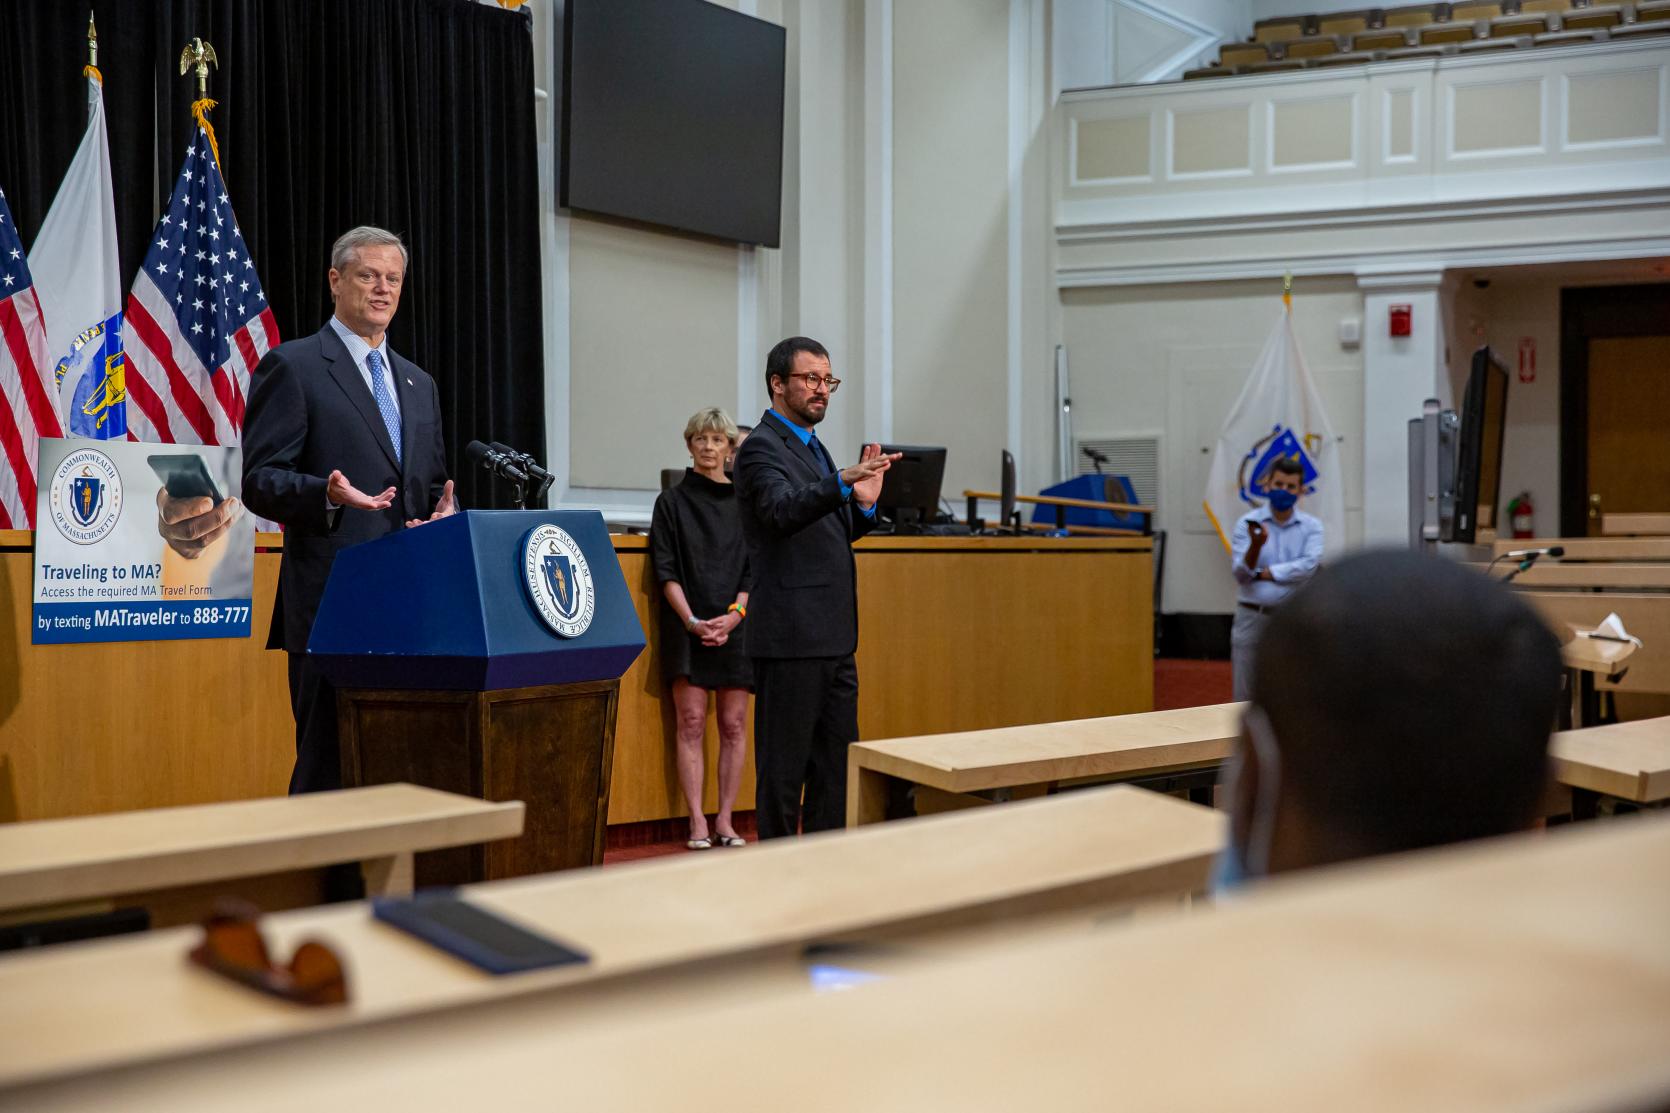 Baker-Polito Administration Awards Over $3 Million to Improve Food Security in Massachusetts